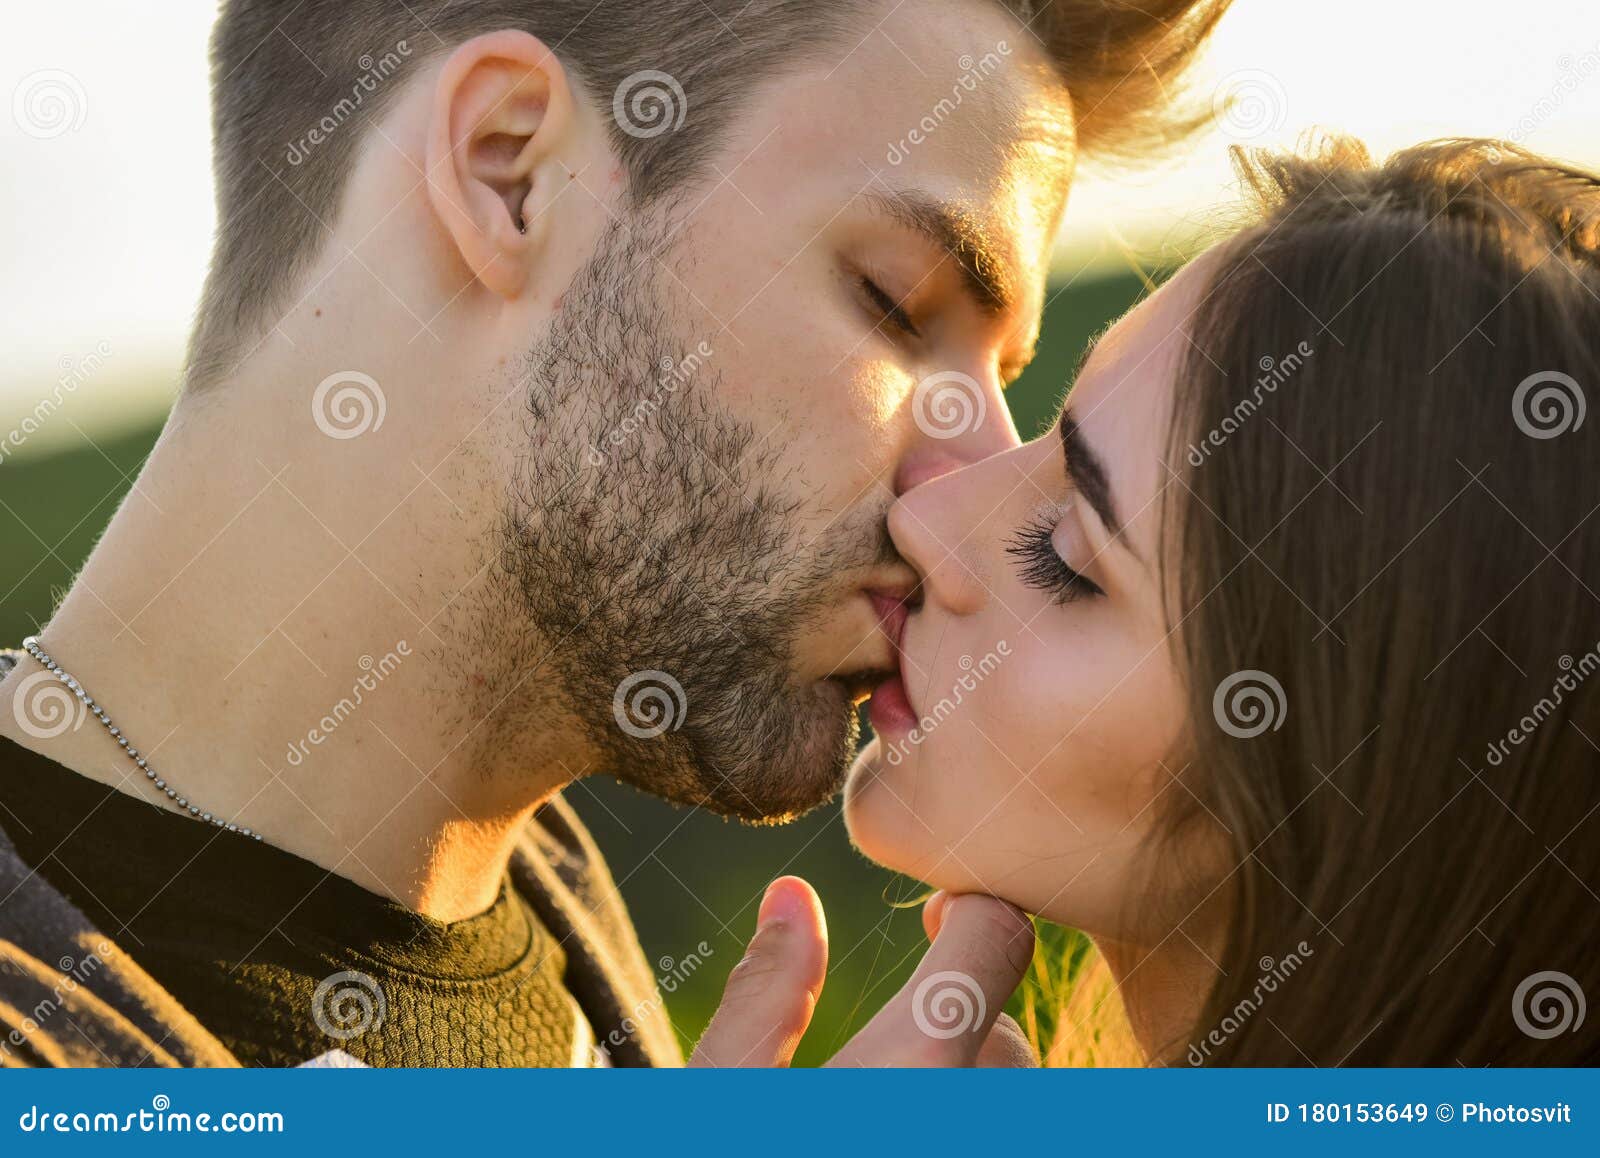 Married people making love Lovely Date Kissing Couple Portrait Delicate Gorgeous Kiss Man Kiss Woman Couple In Love I Love You Closeup Mouths Stock Image Image Of People Gorgeous 180153649